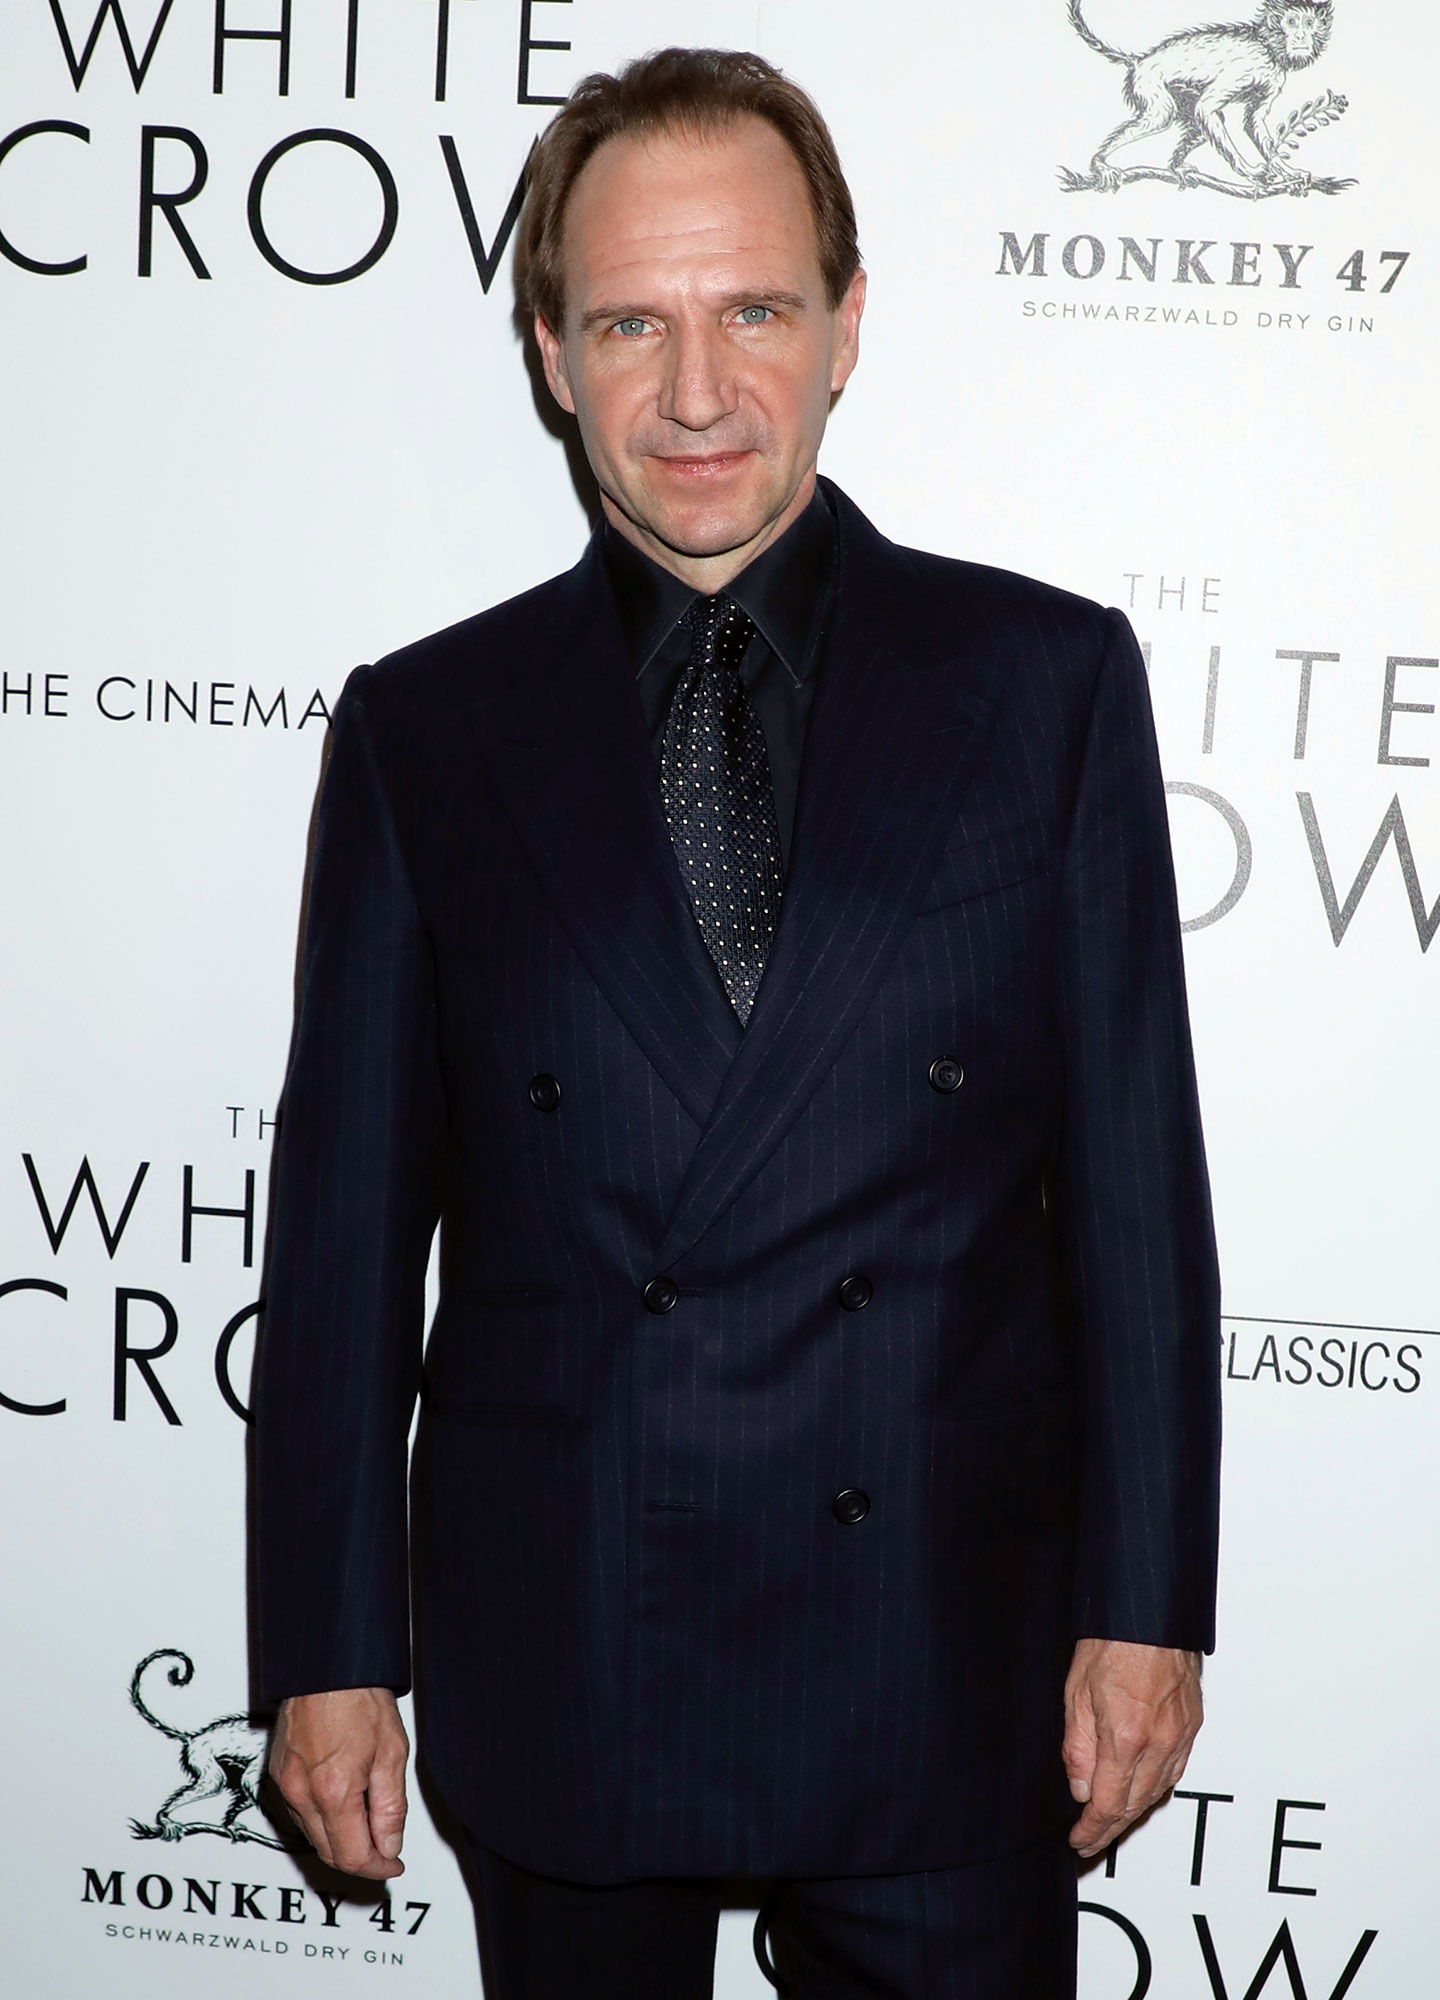 Ralph Fiennes What the Harry Potter Cast Has Said About Where They Stand With JK Rowling